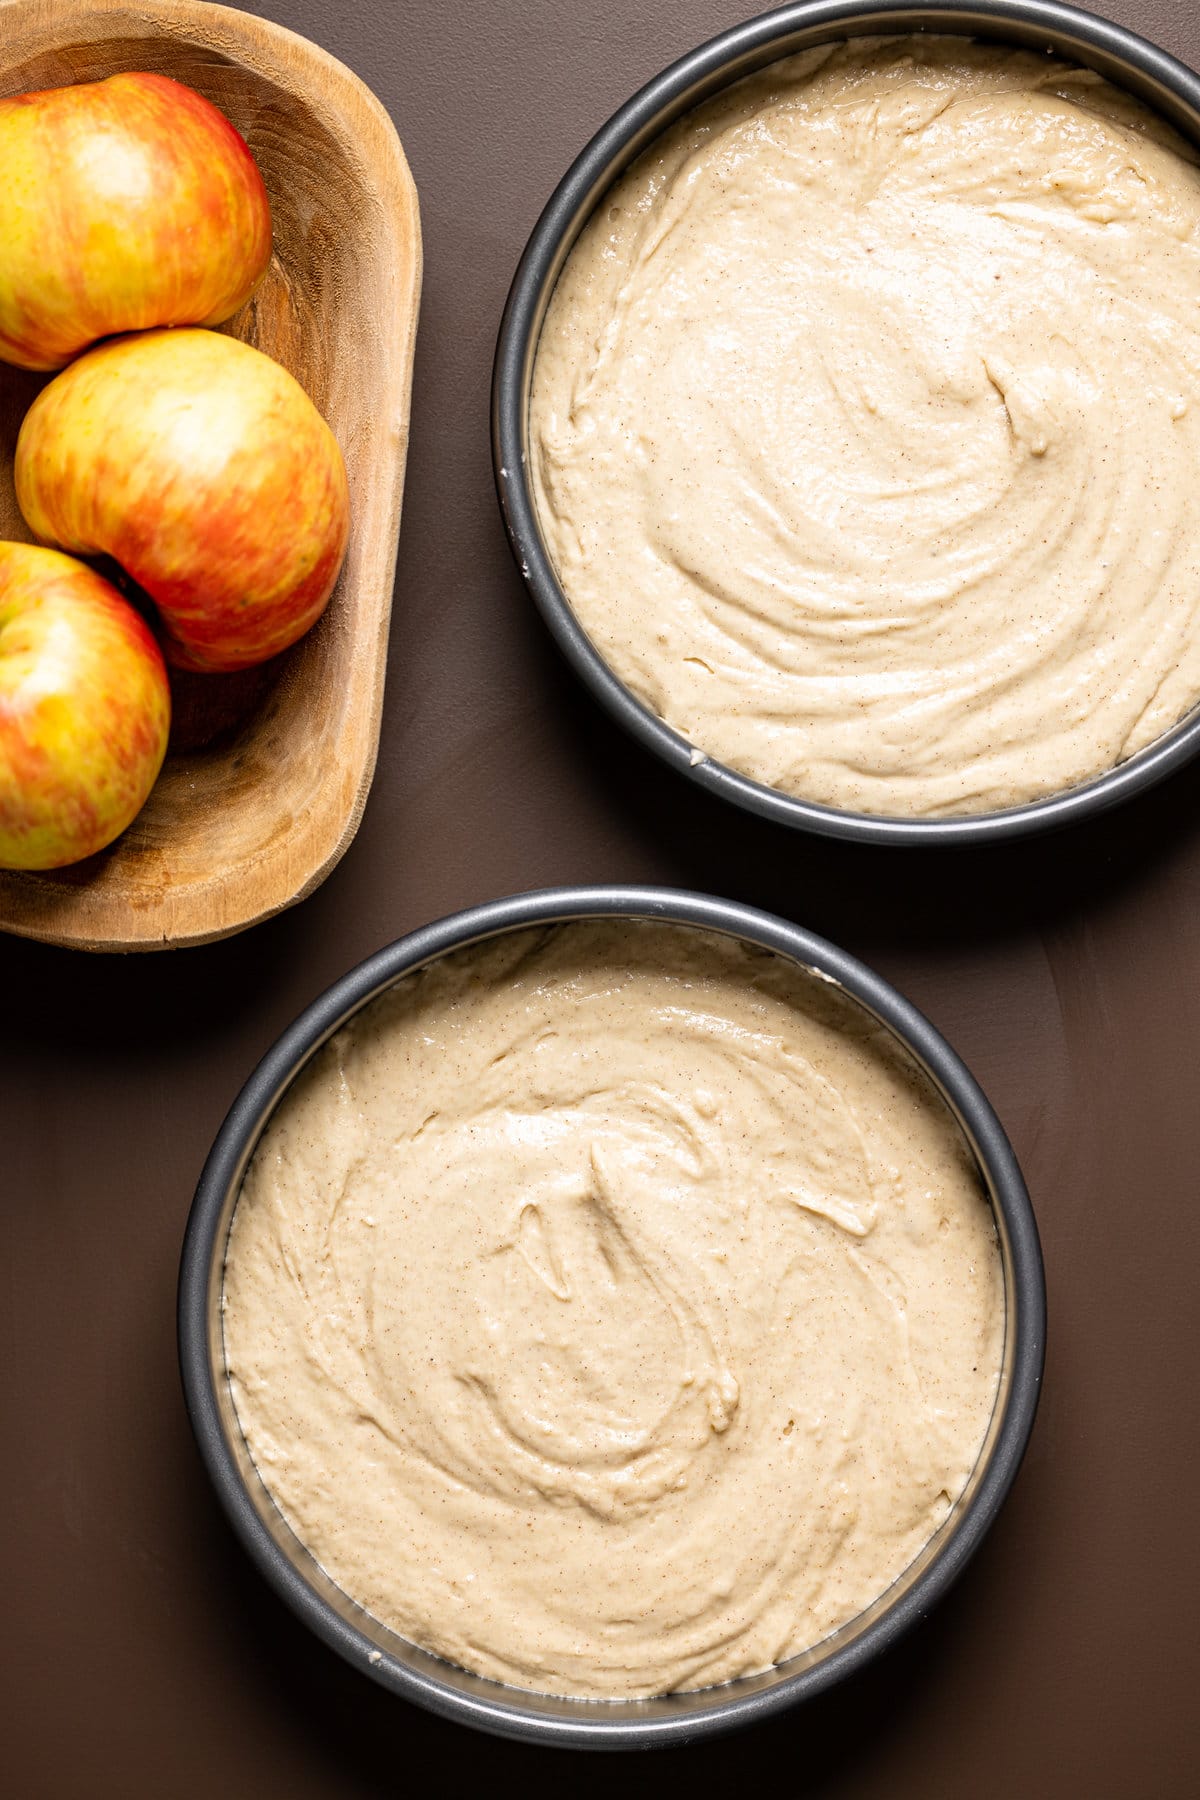 Two circle pans filled with Apple Cider Cake batter next to a bowl of apples